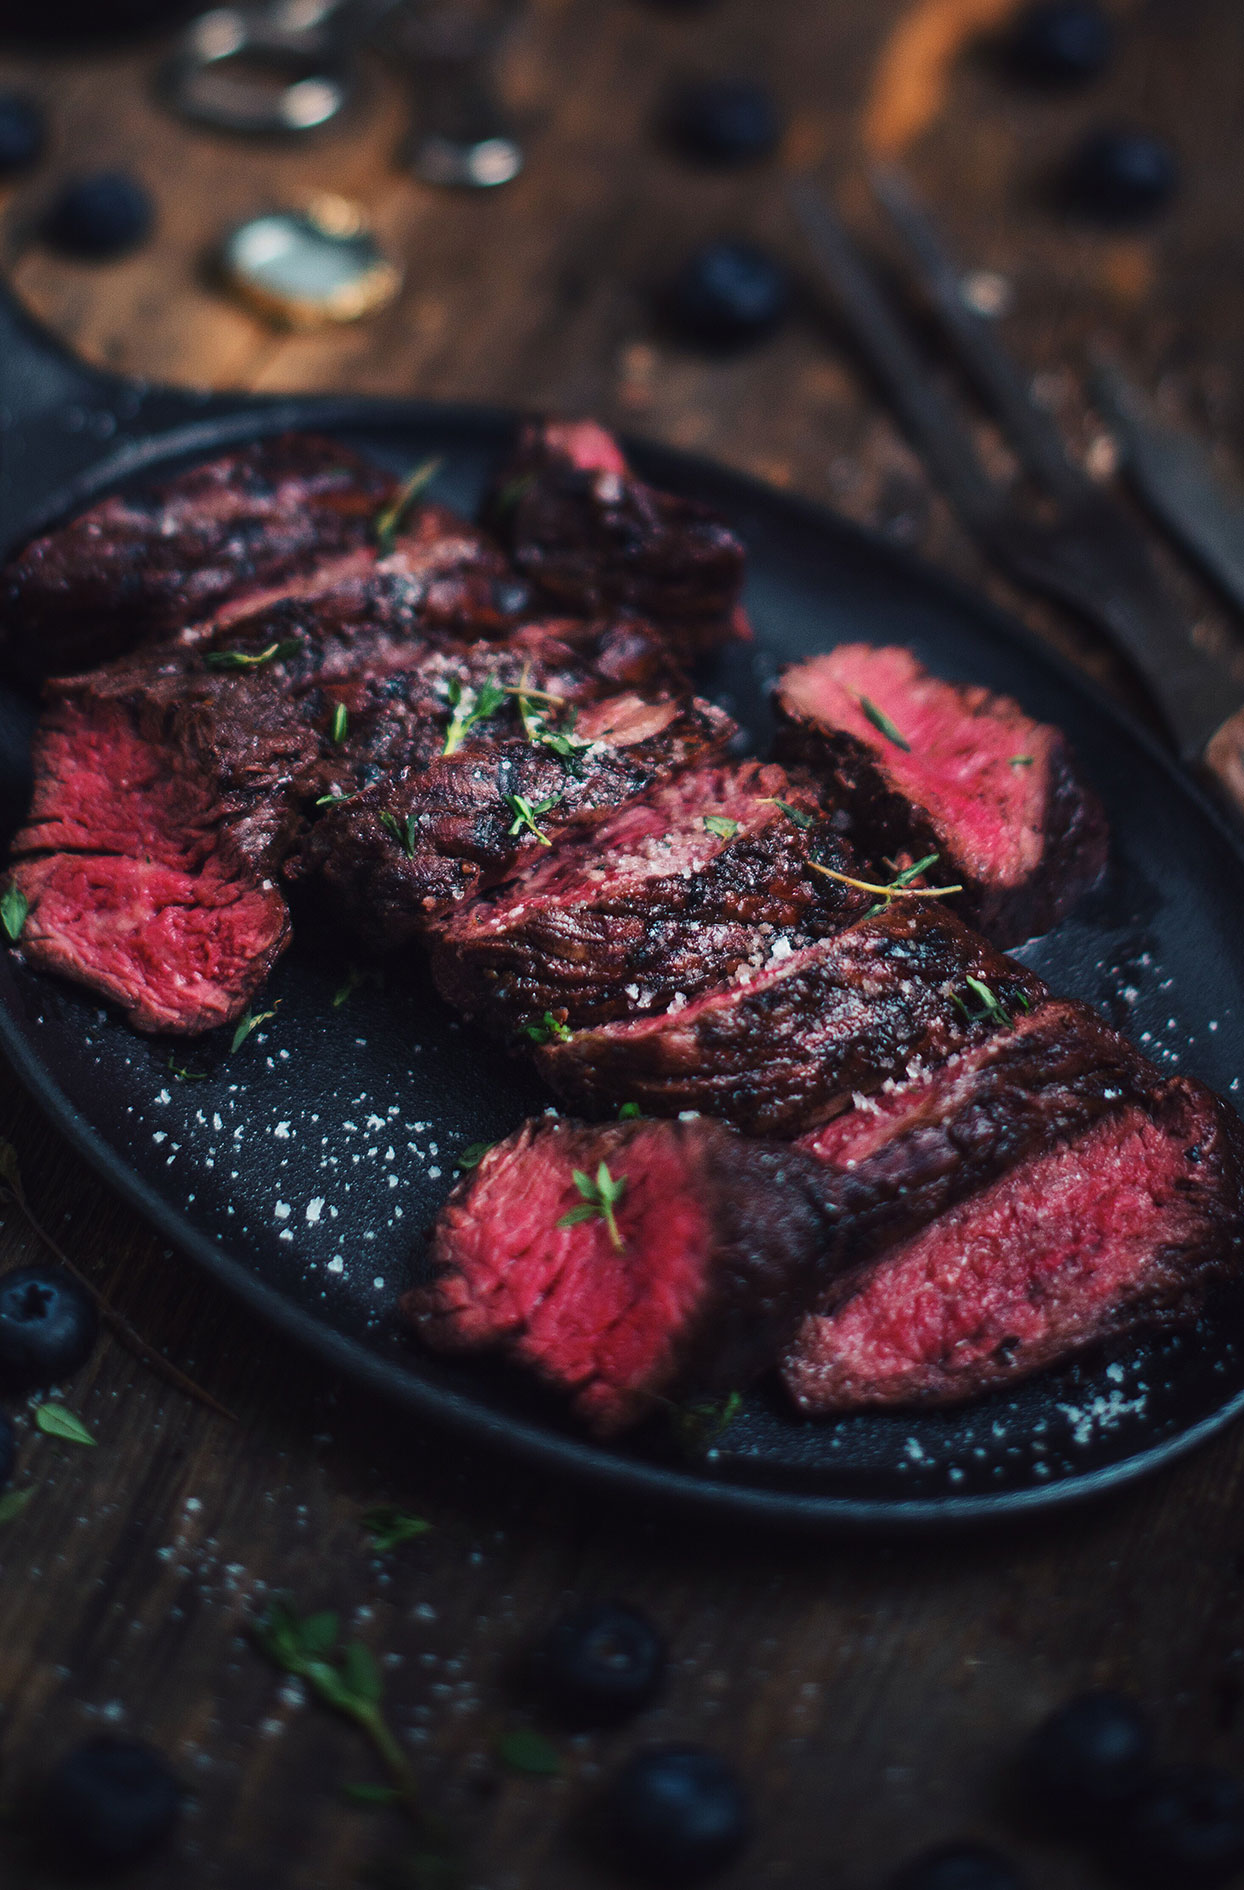 Grilled hanger steak with blueberry and balsamic vinegar marinade